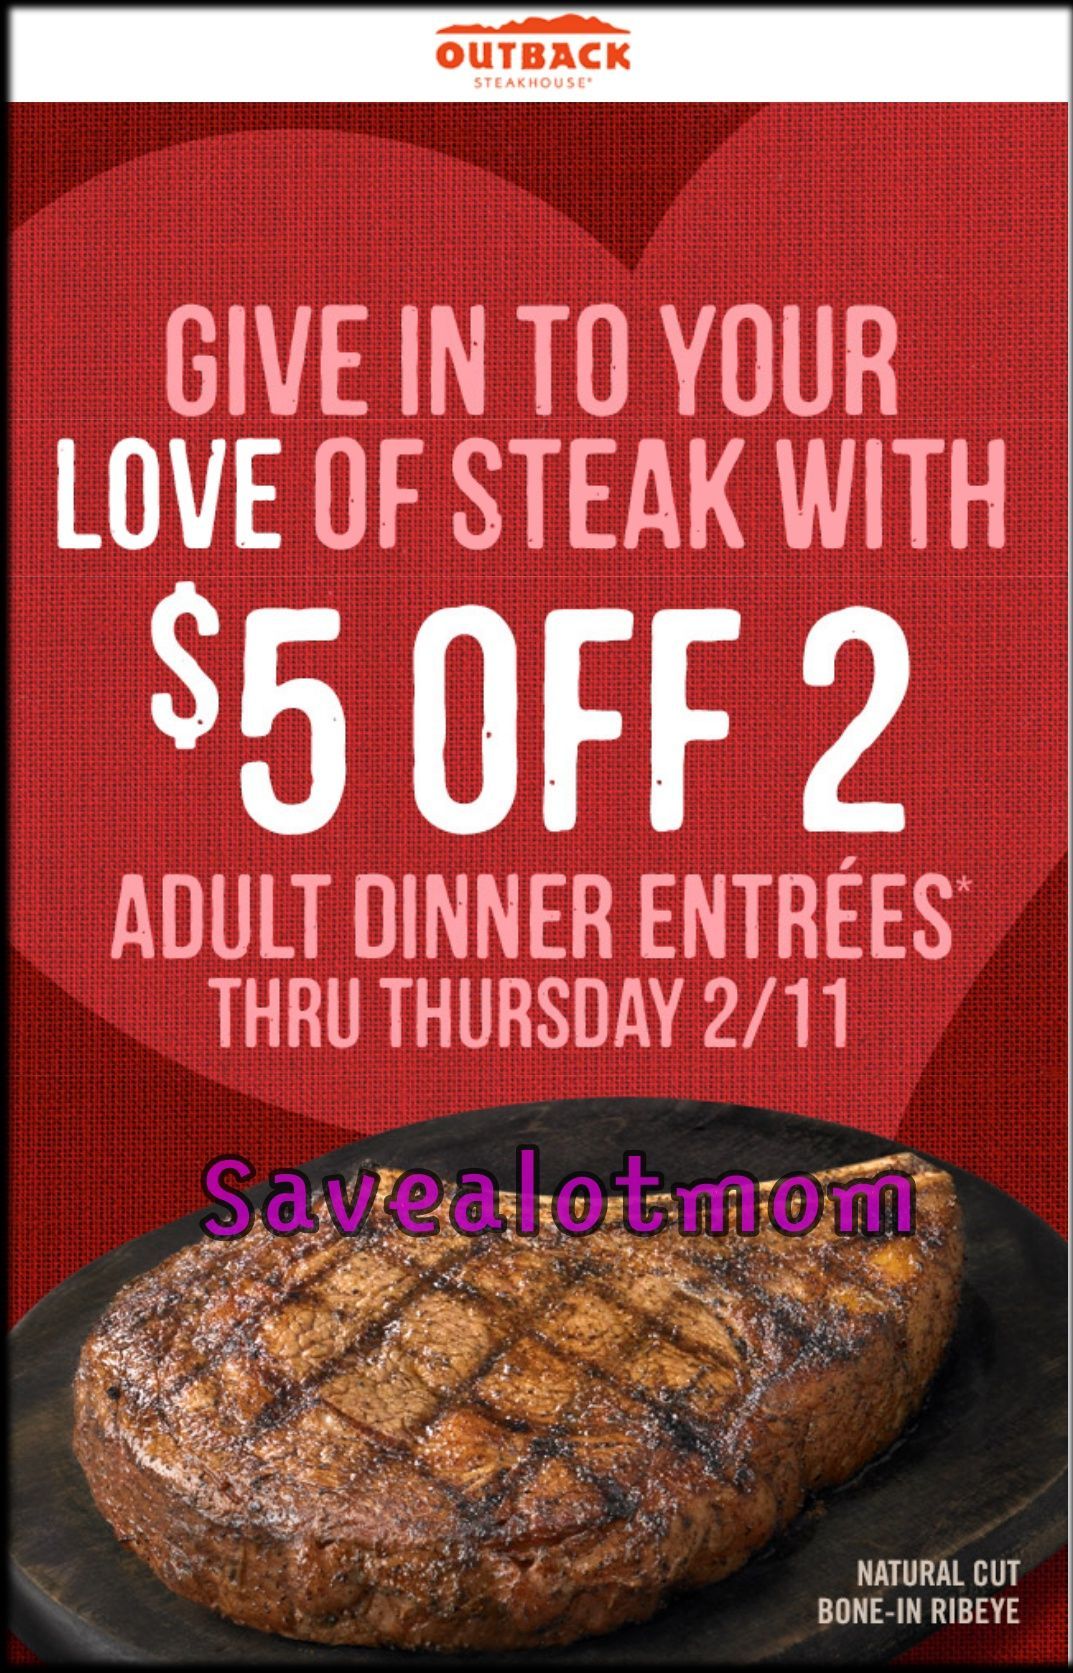 outback-steakhouse-5-off-coupon-and-valentine-meal-offer-save-a-lot